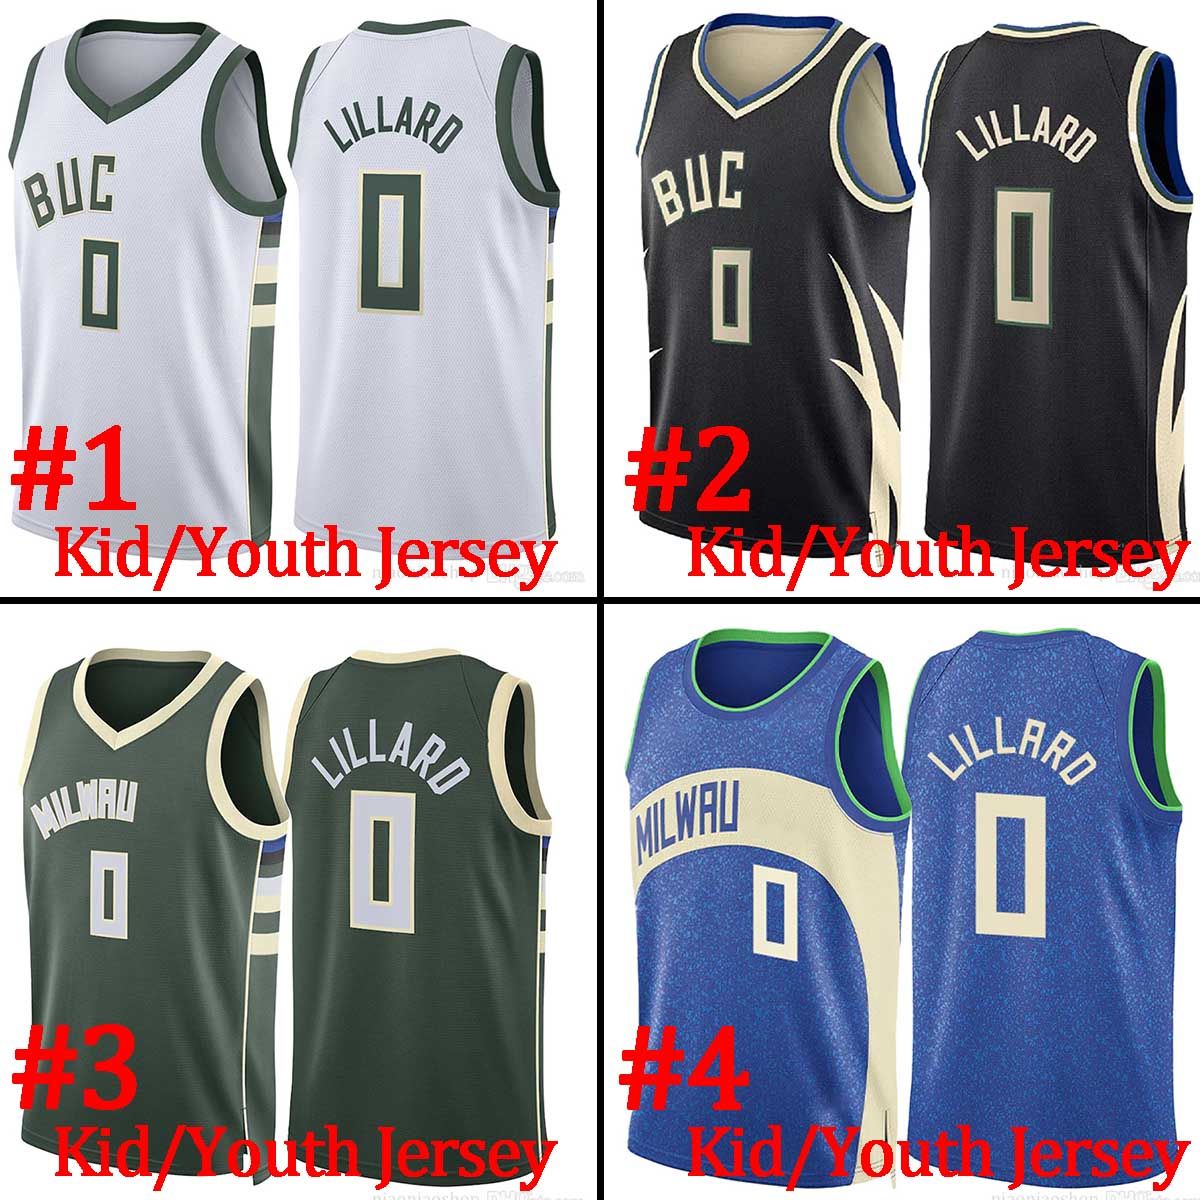 Youth/kid Jersey13